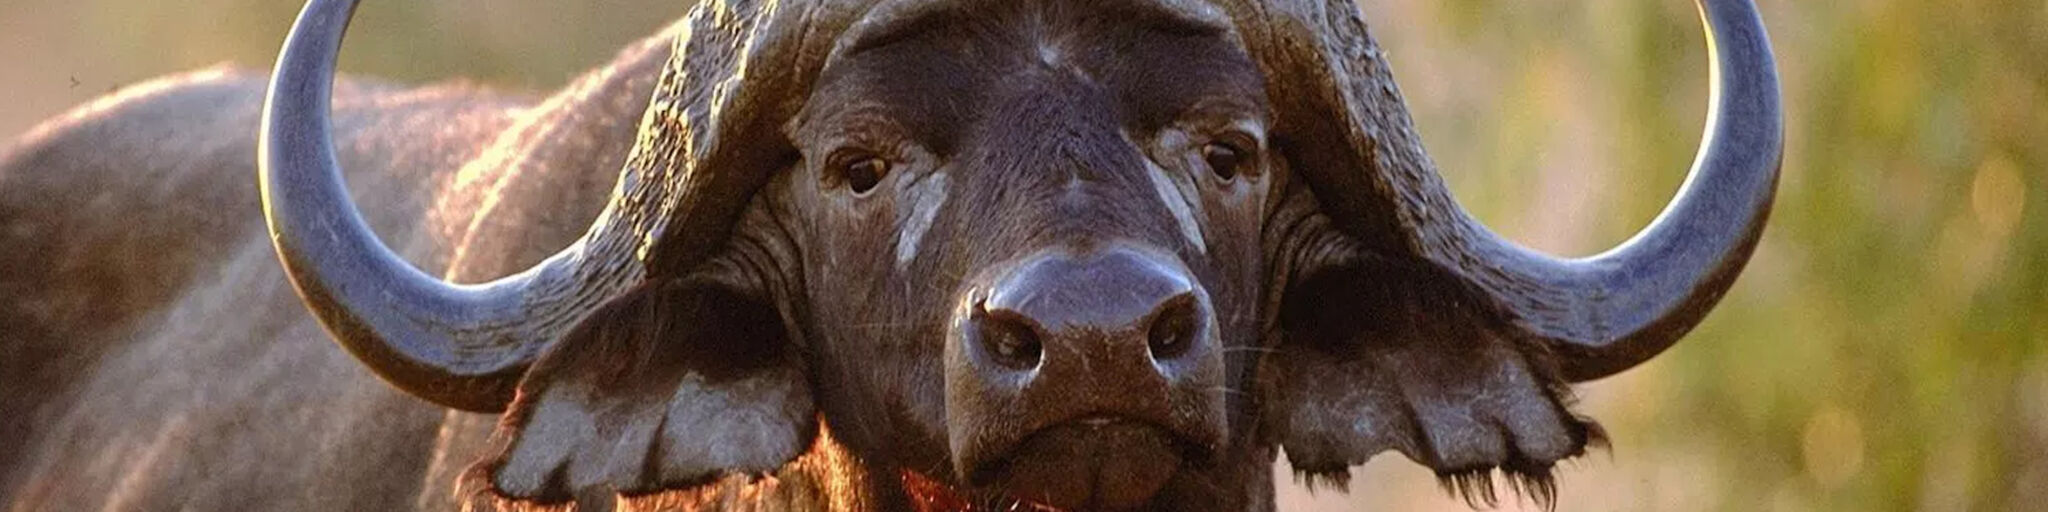 6 Reasons Buffalos May be the Snarkiest Beasts on the Planet